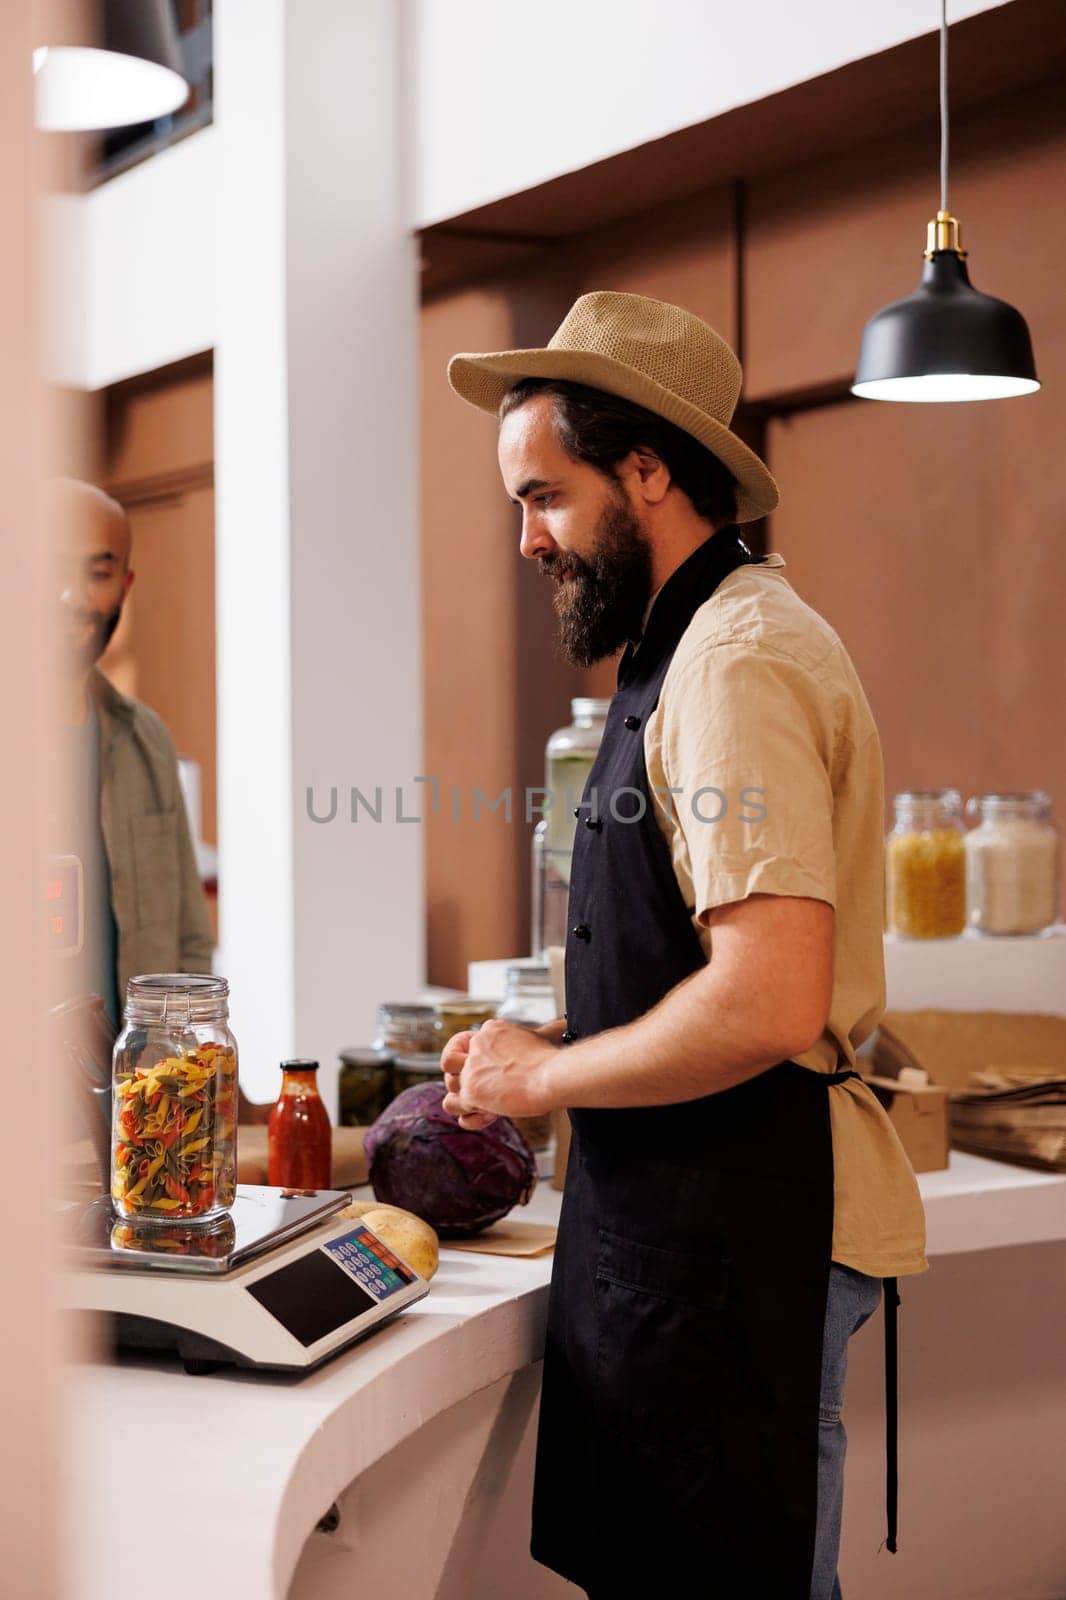 Male storekeeper, wearing a hat and apron, stands behind cashier desk while looking at jar filled with certain organic food item on measuring scale. Caucasian vendor weighing pasta for customer.